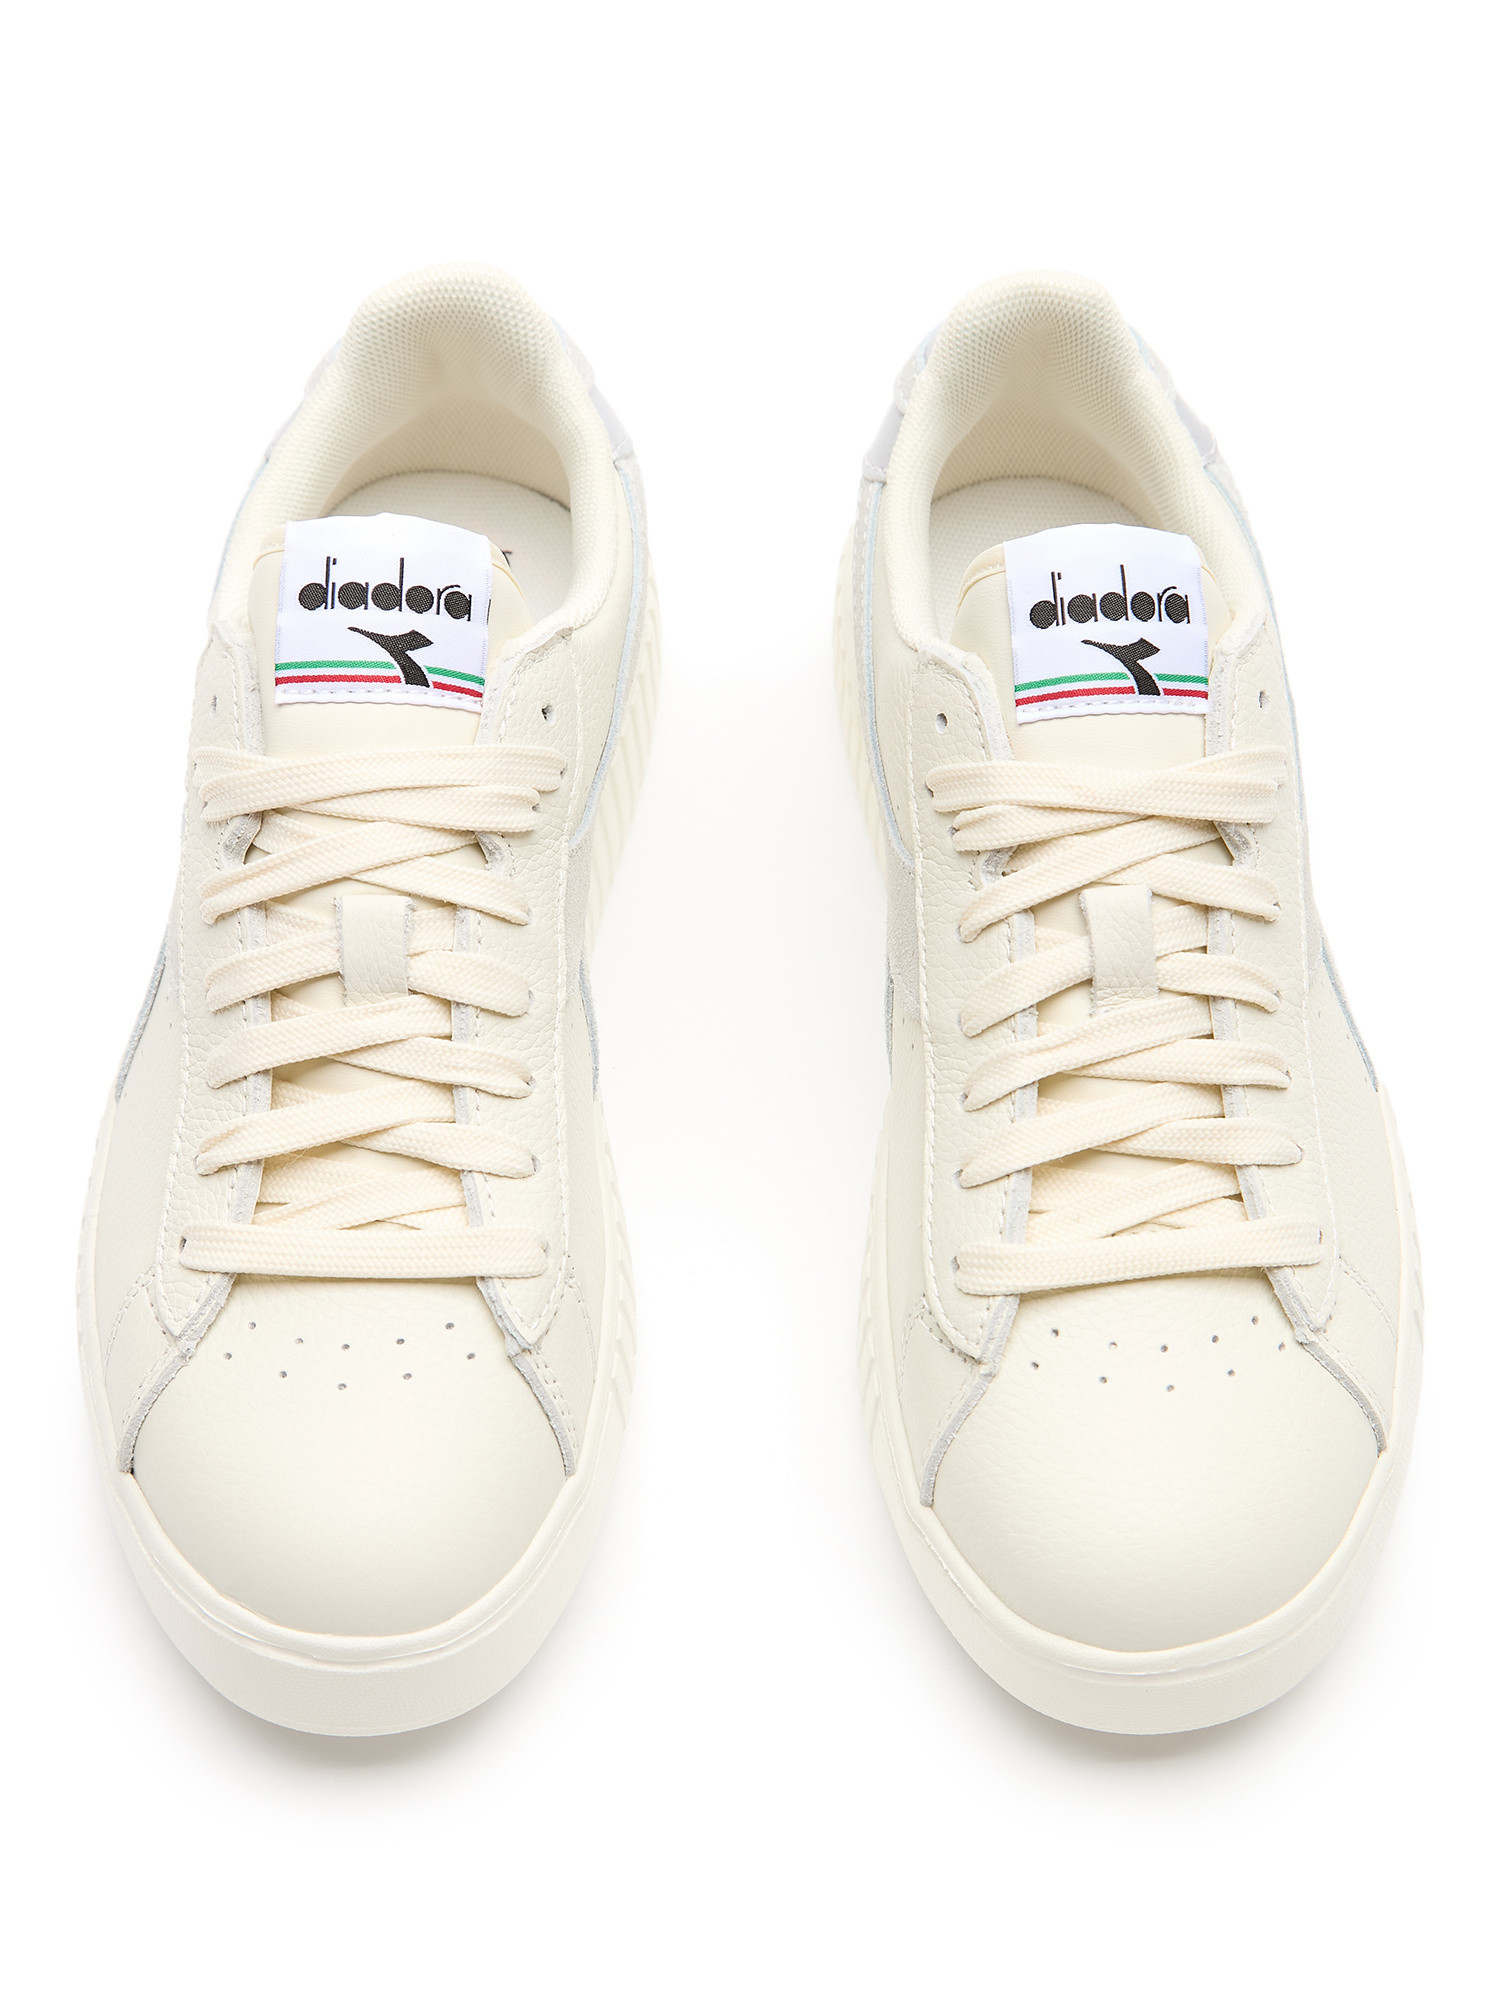 Diadora - Game Step Premium Tumbled Leather Shoes, White, large image number 3